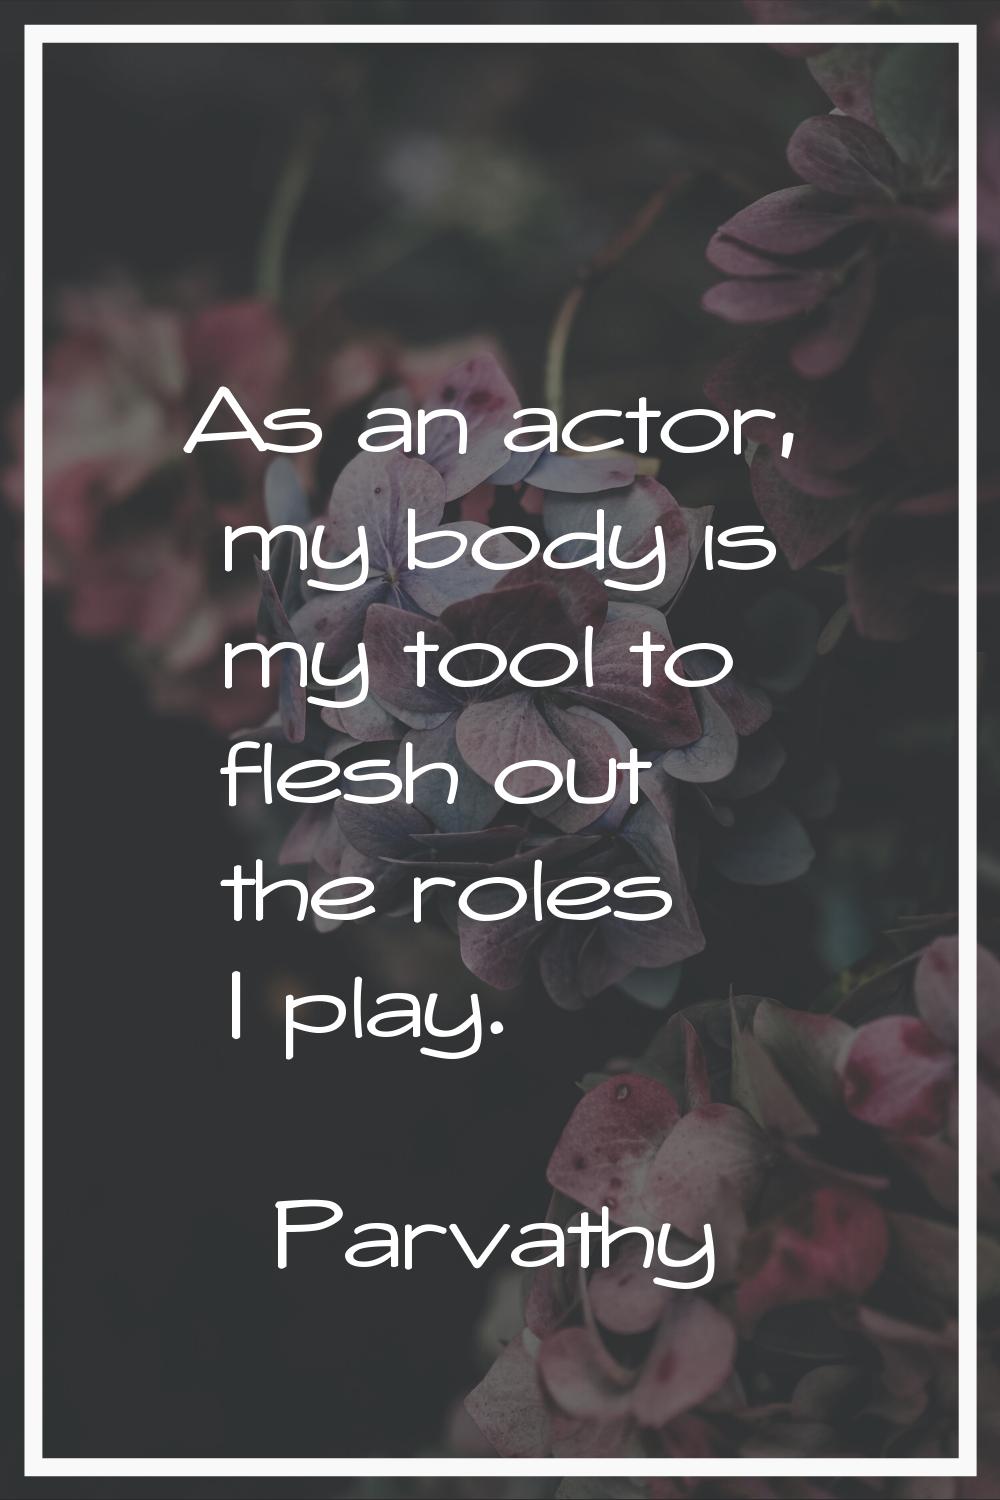 As an actor, my body is my tool to flesh out the roles I play.